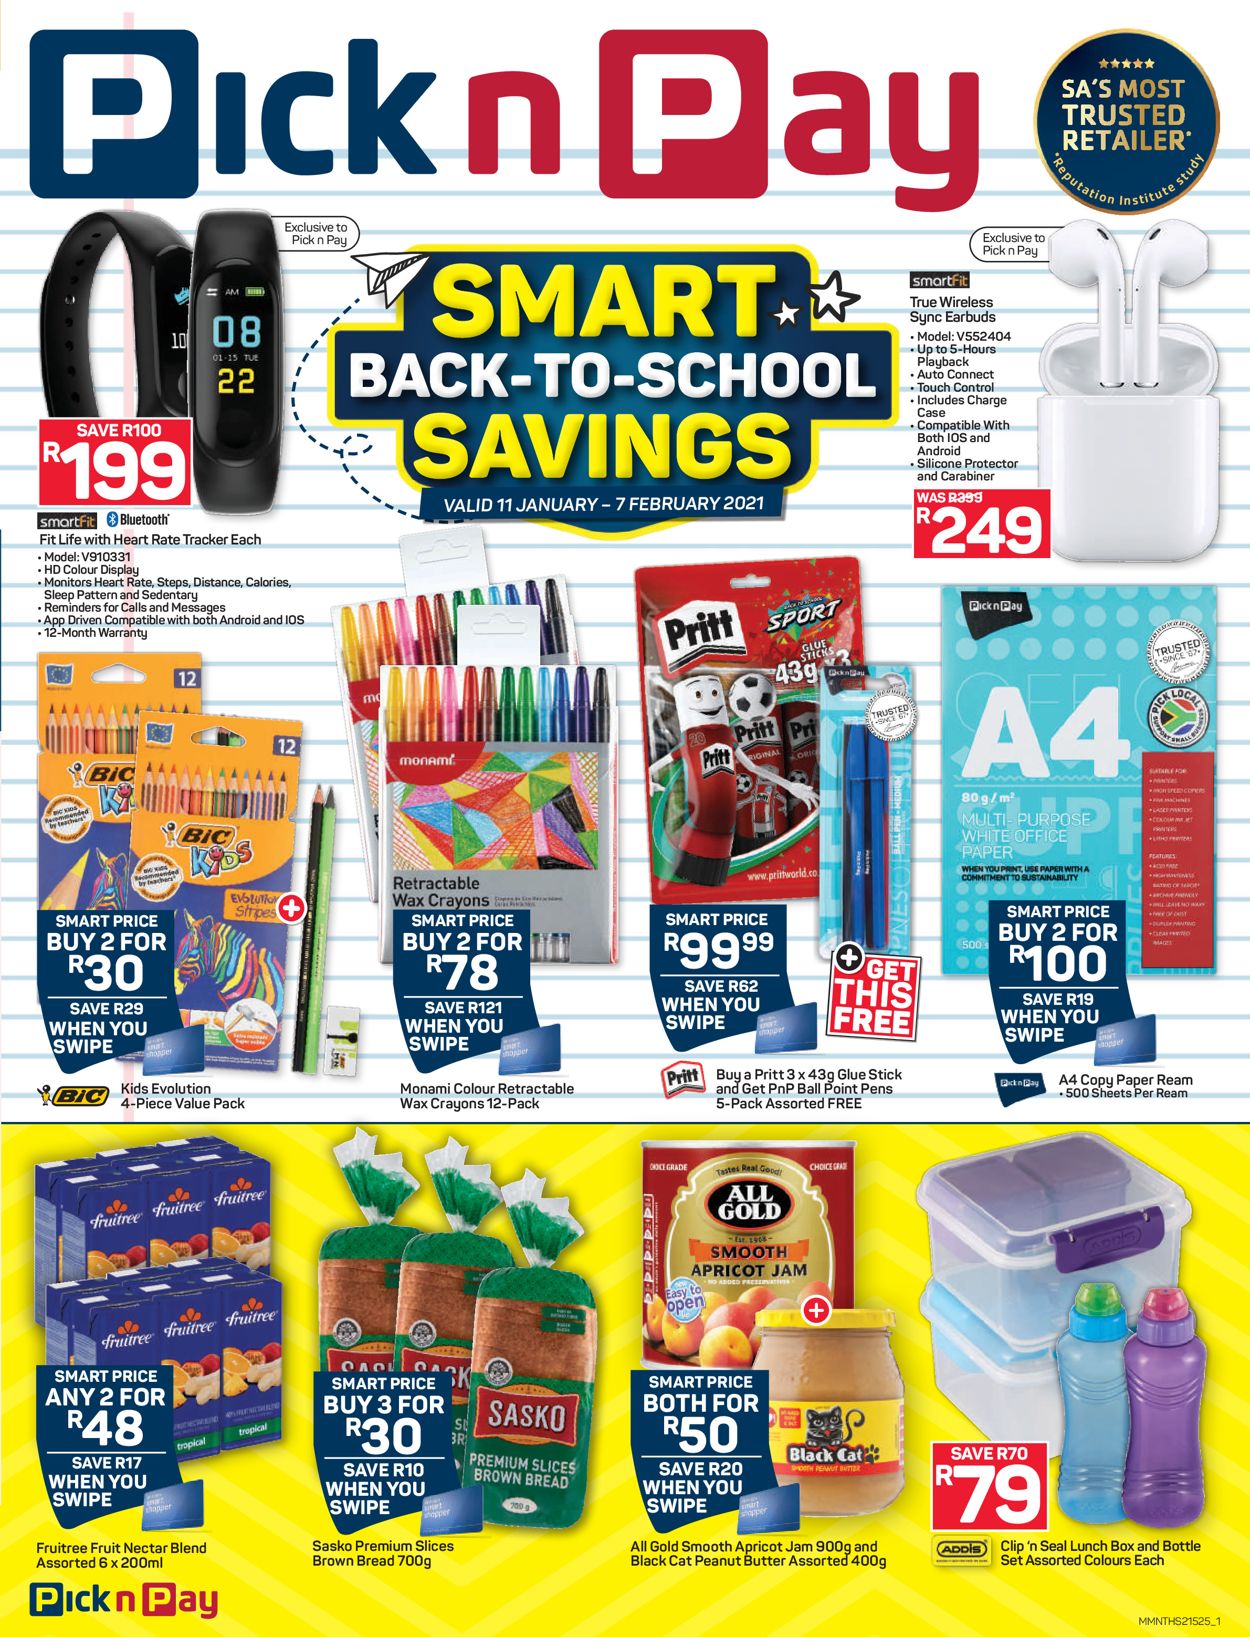 Pick n Pay Back to School 2021 Catalogue - 2021/01/11-2021/02/07